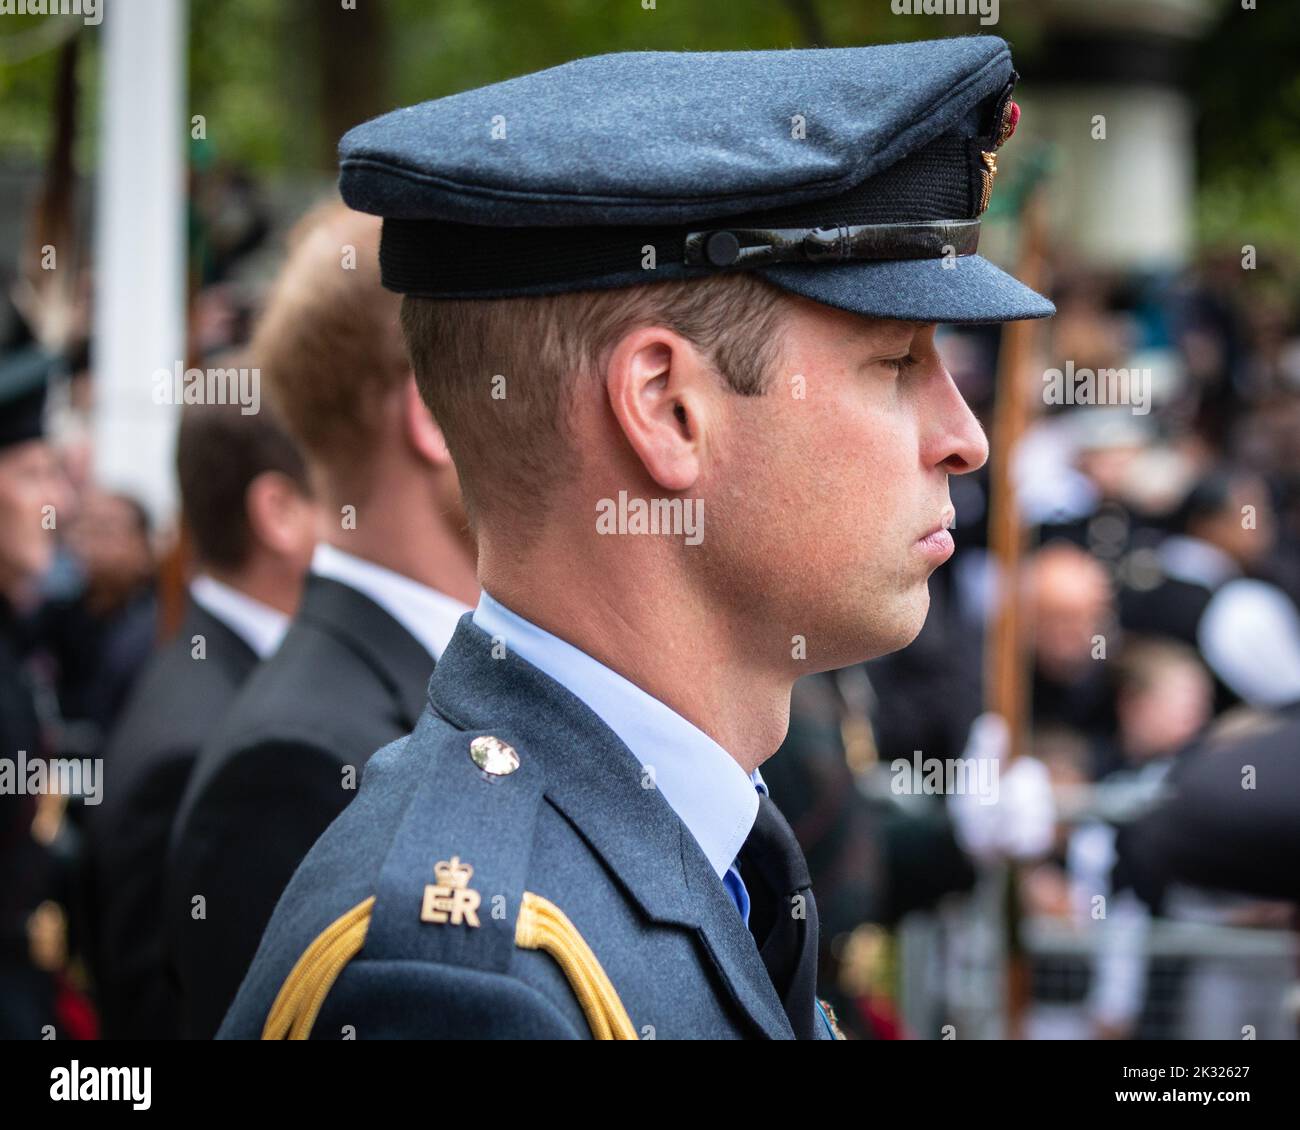 William, the Prince of Wales, Prince William, close up, in uniform, Queen Elizabeth II funeral procession in London, 22 September 2022, England, UK Stock Photo